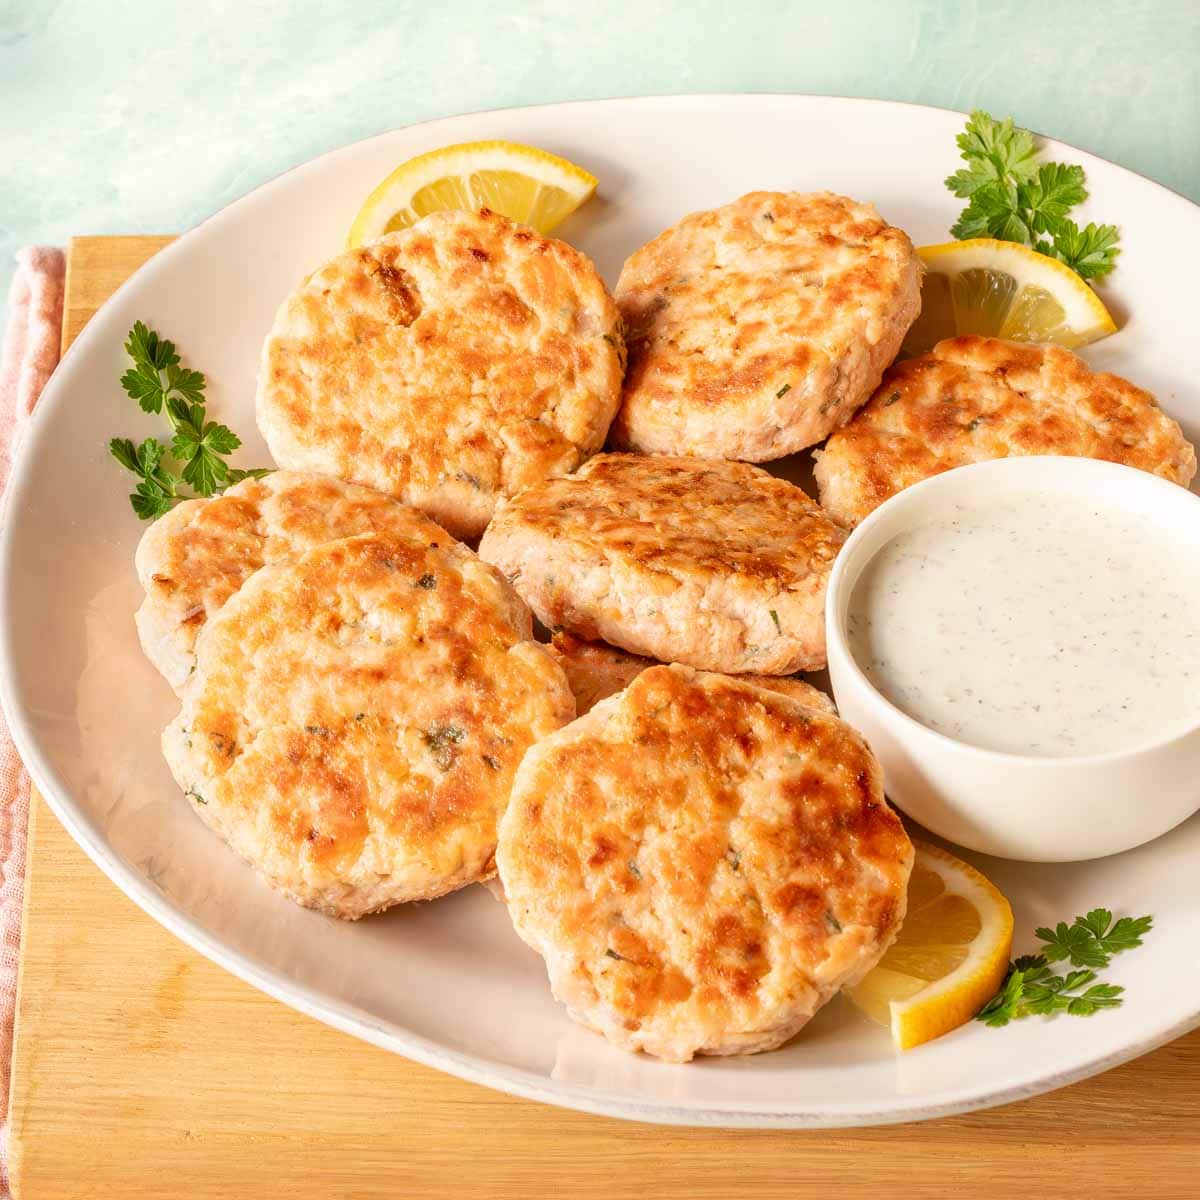 round plate holding several salmon patties, along with a bowl of Tzatziki sauce on the side